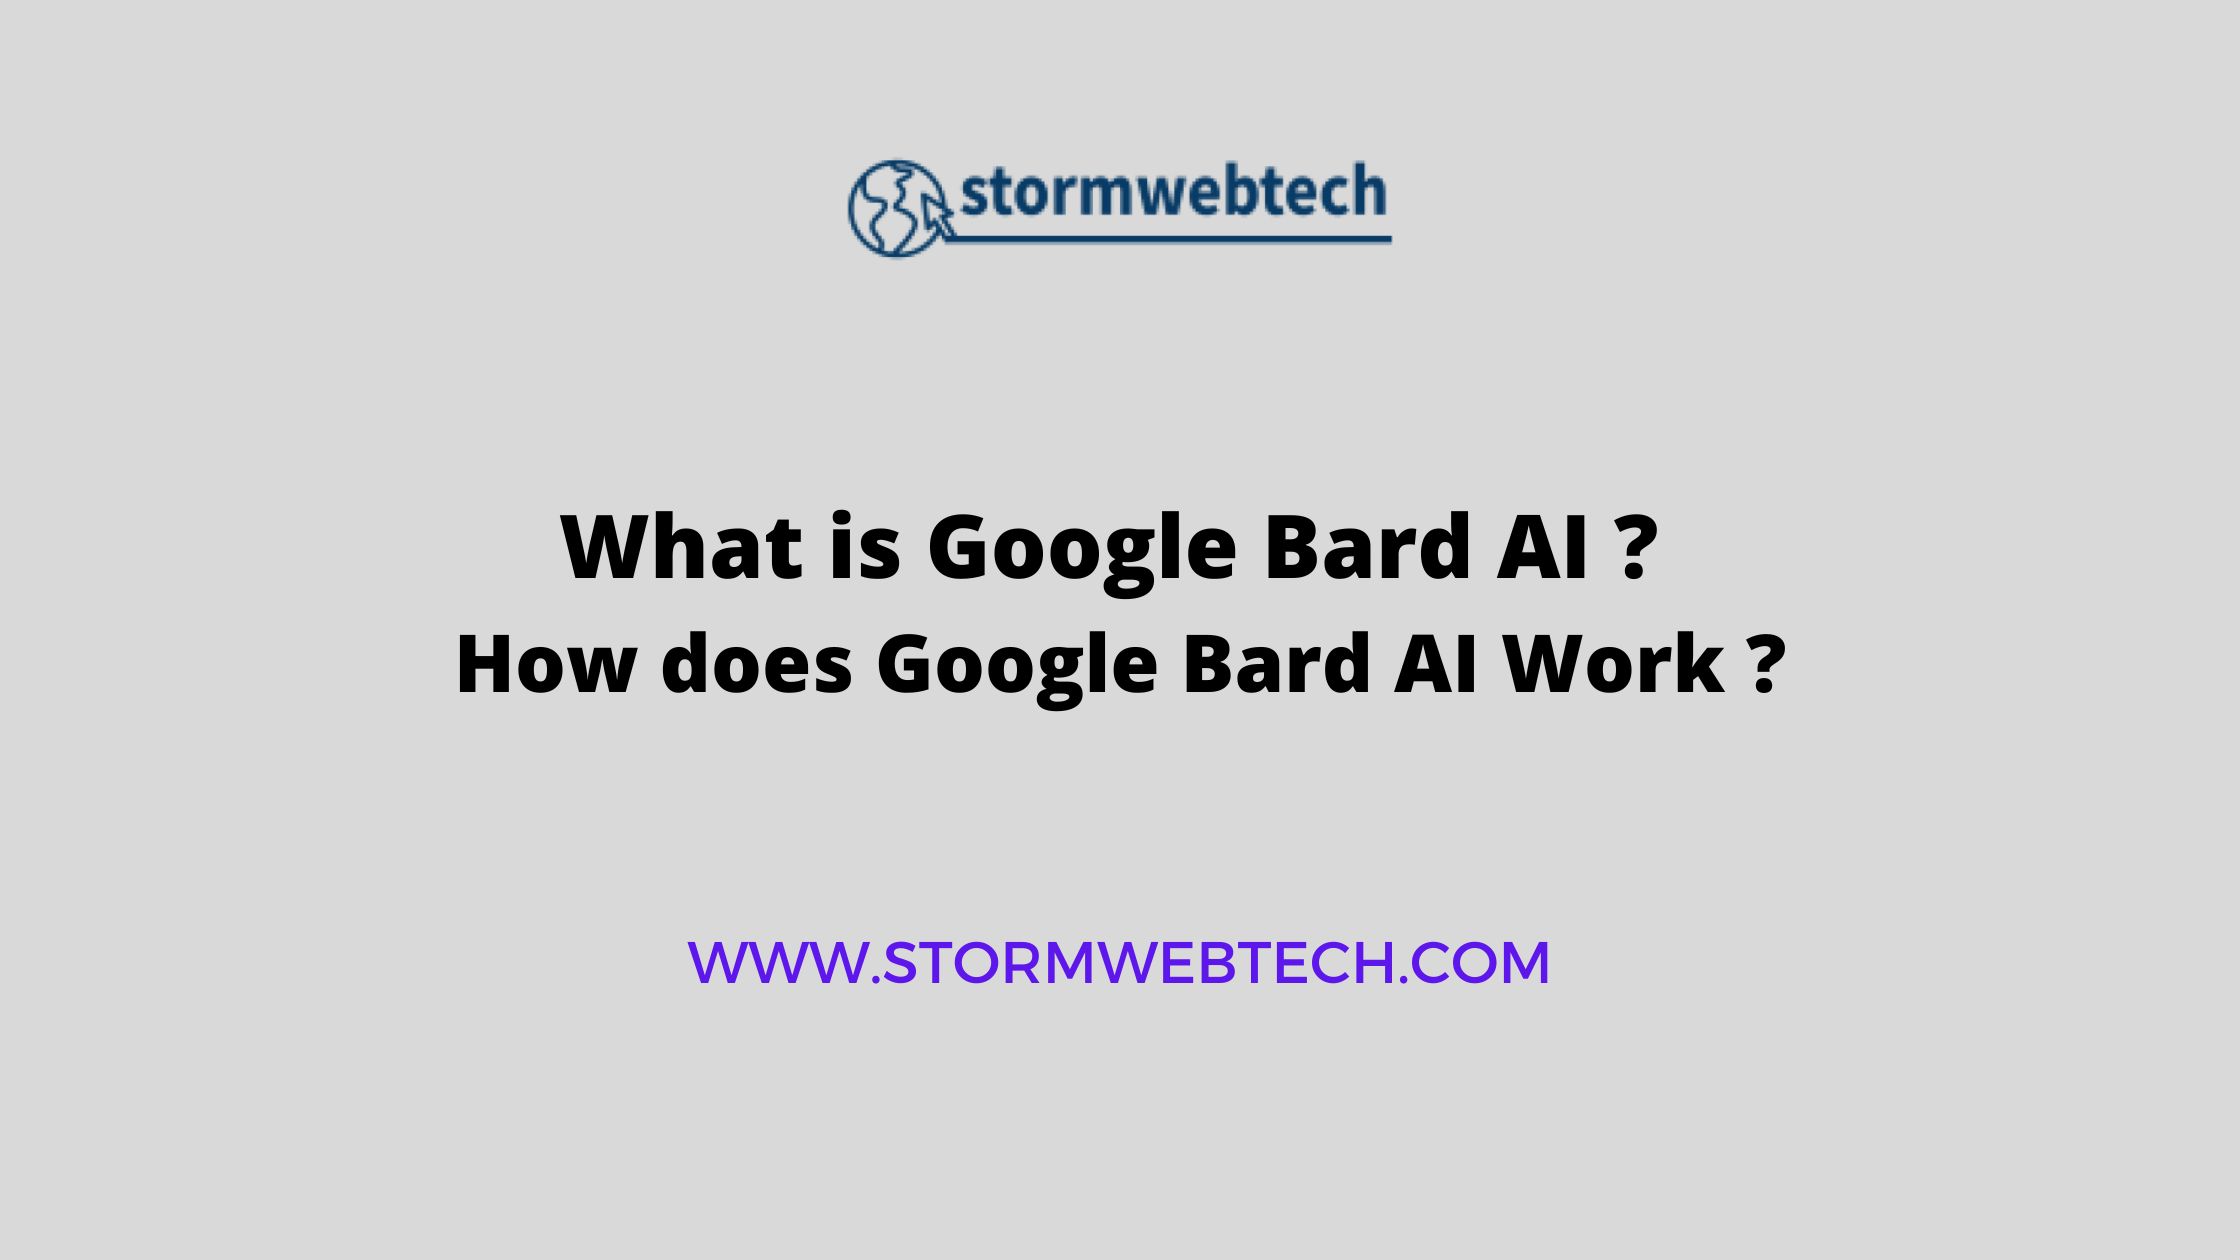 What is Google Bard AI ? How does Google Bard AI Work ? What are the benefits of using Google Bard AI ? What can Google Bard AI do ?